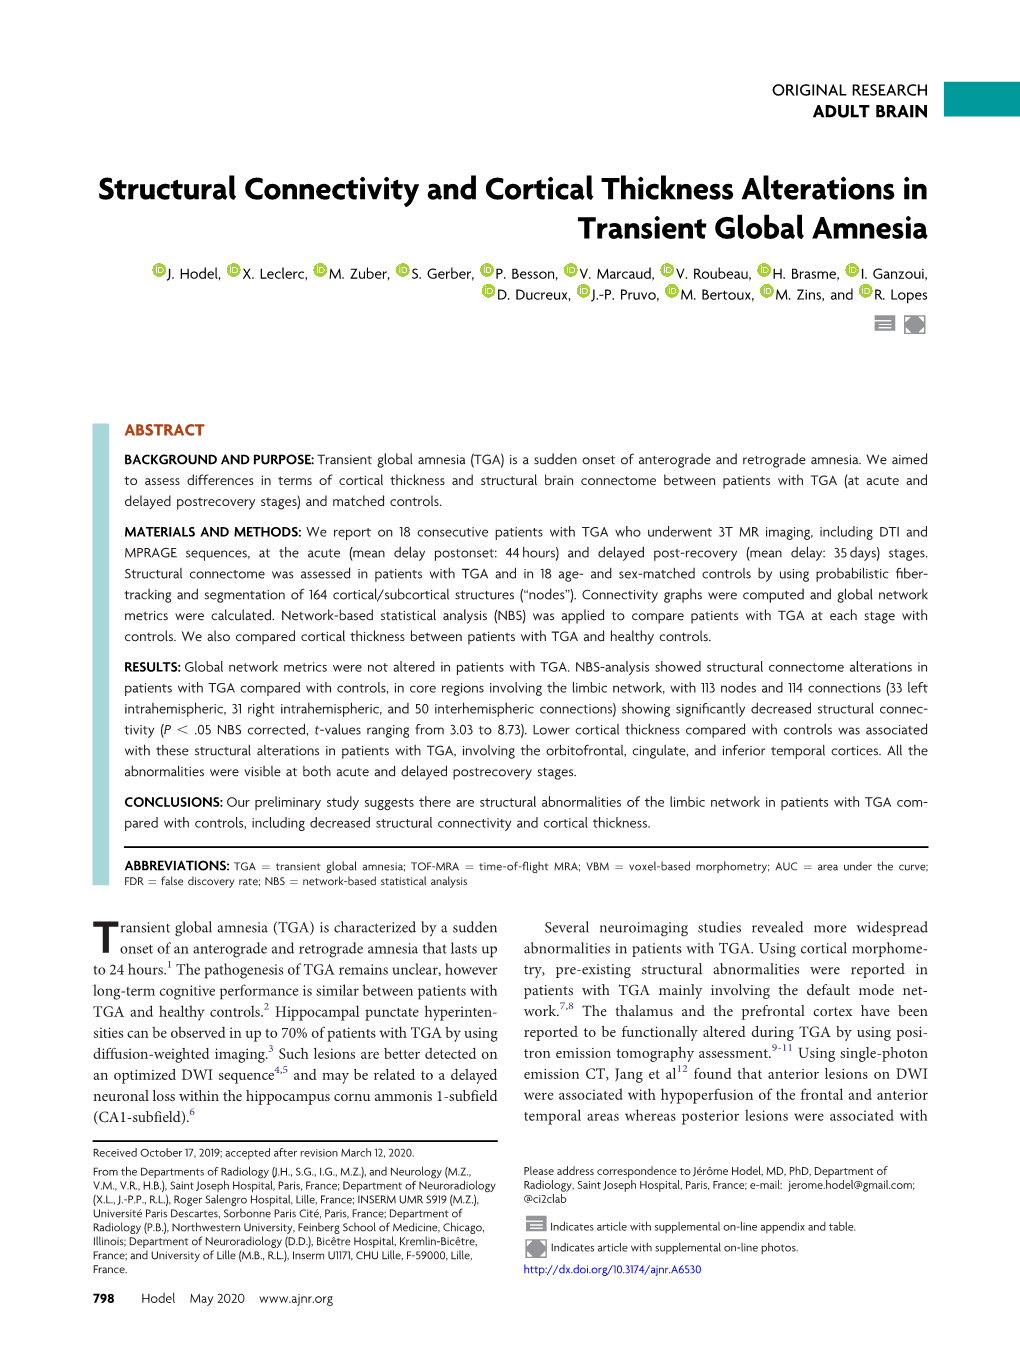 Structural Connectivity and Cortical Thickness Alterations in Transient Global Amnesia